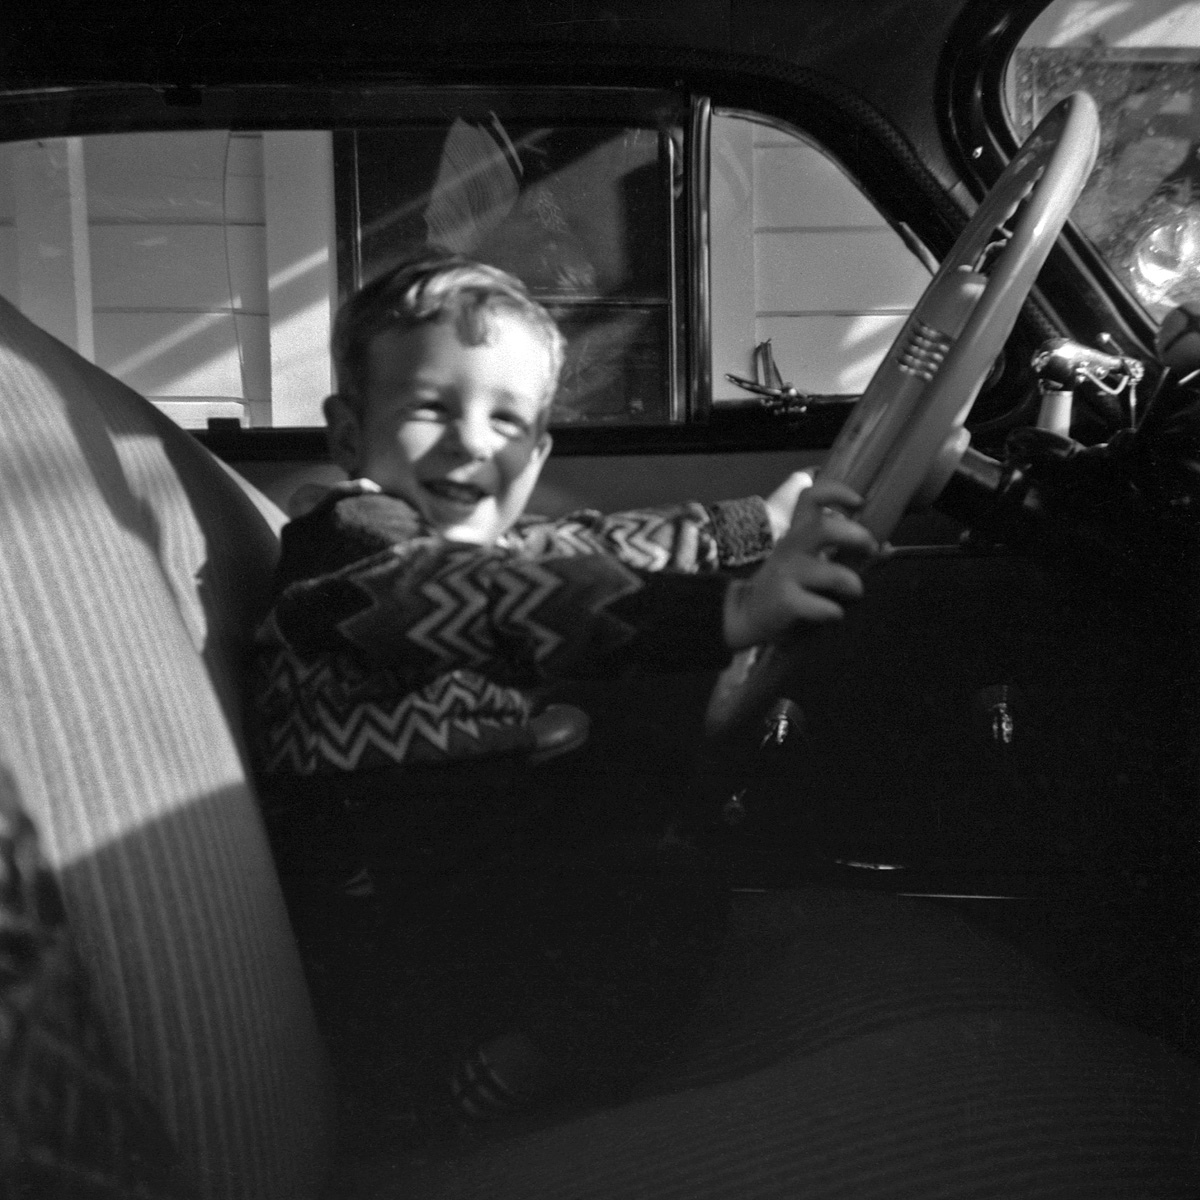 Here I am at the wheel of the 1948 Hudson posted earlier. I figure I'm about three here, which would make it around 1949-50.